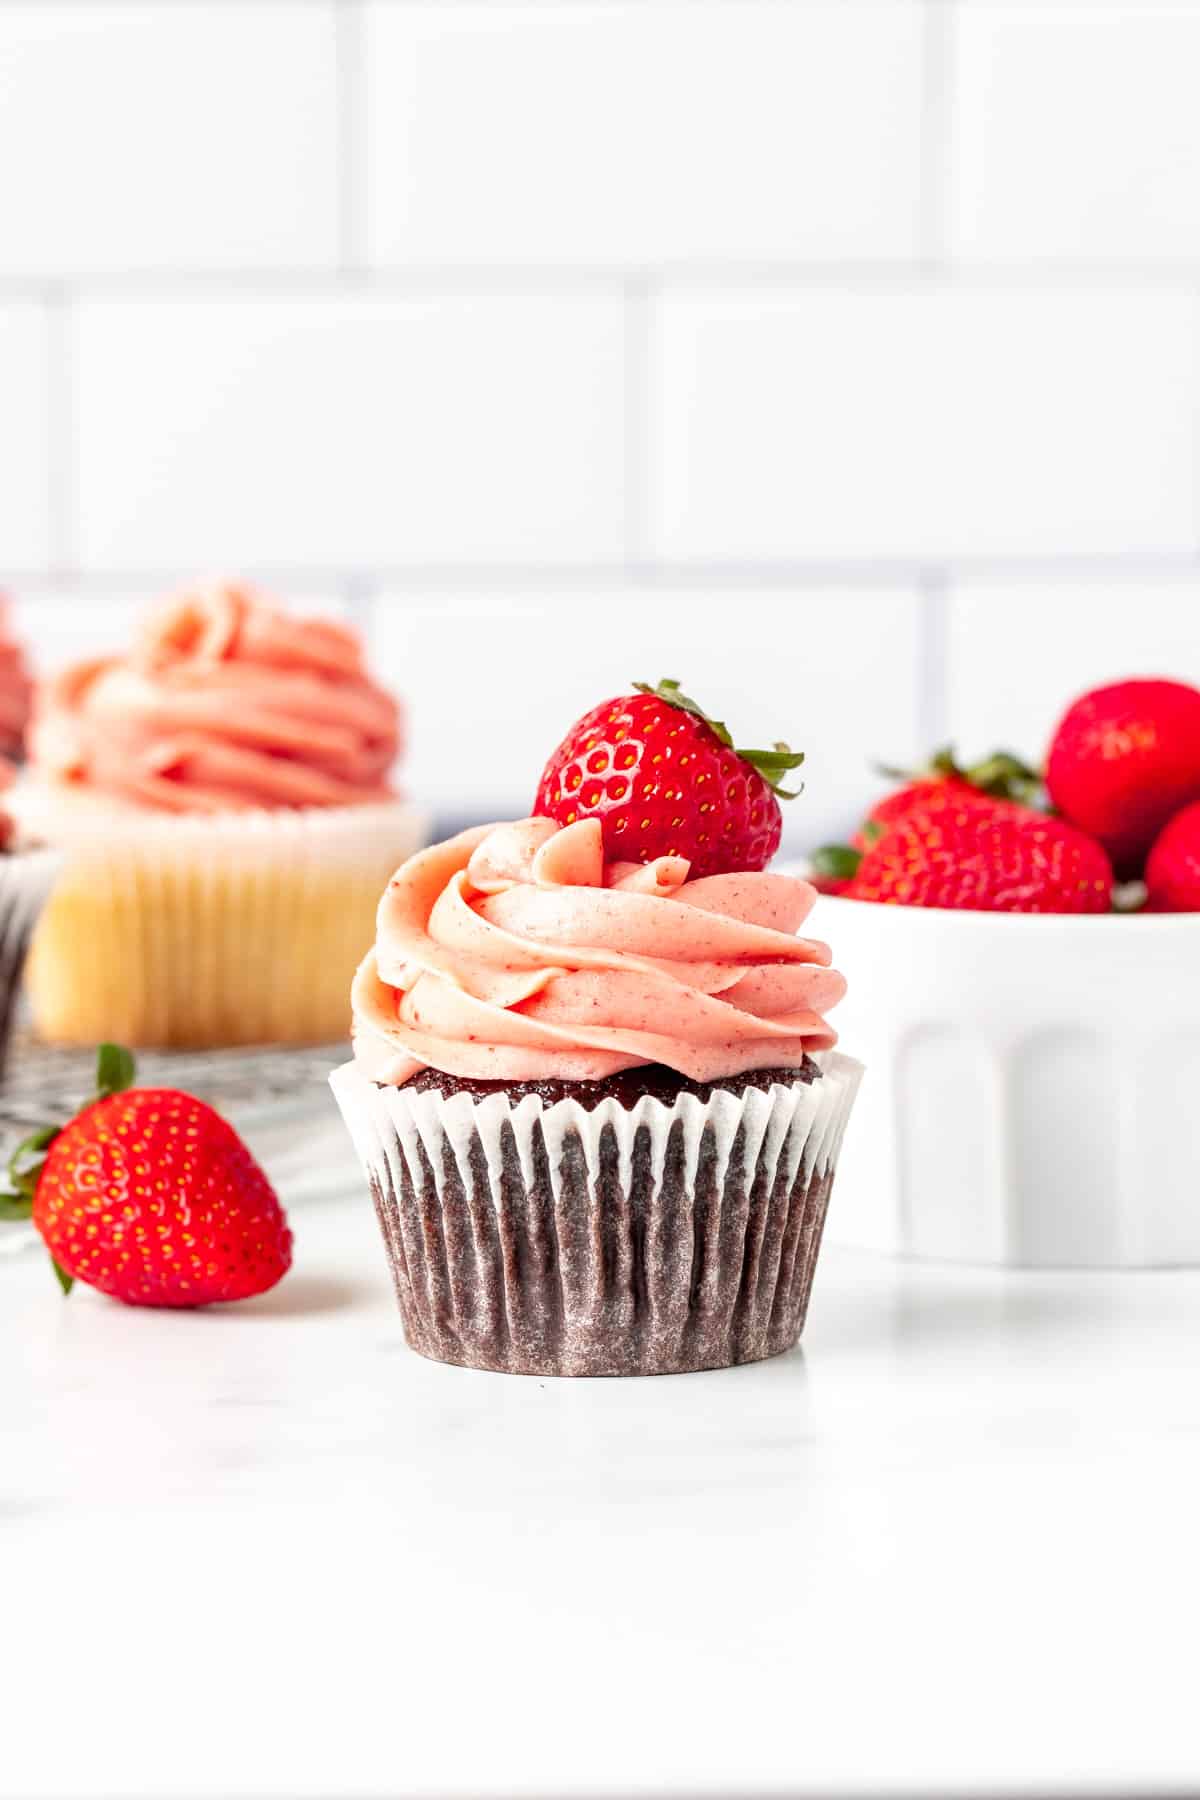 Chocolate cupcake decorated with strawberry buttercream frosting and topped with a berry